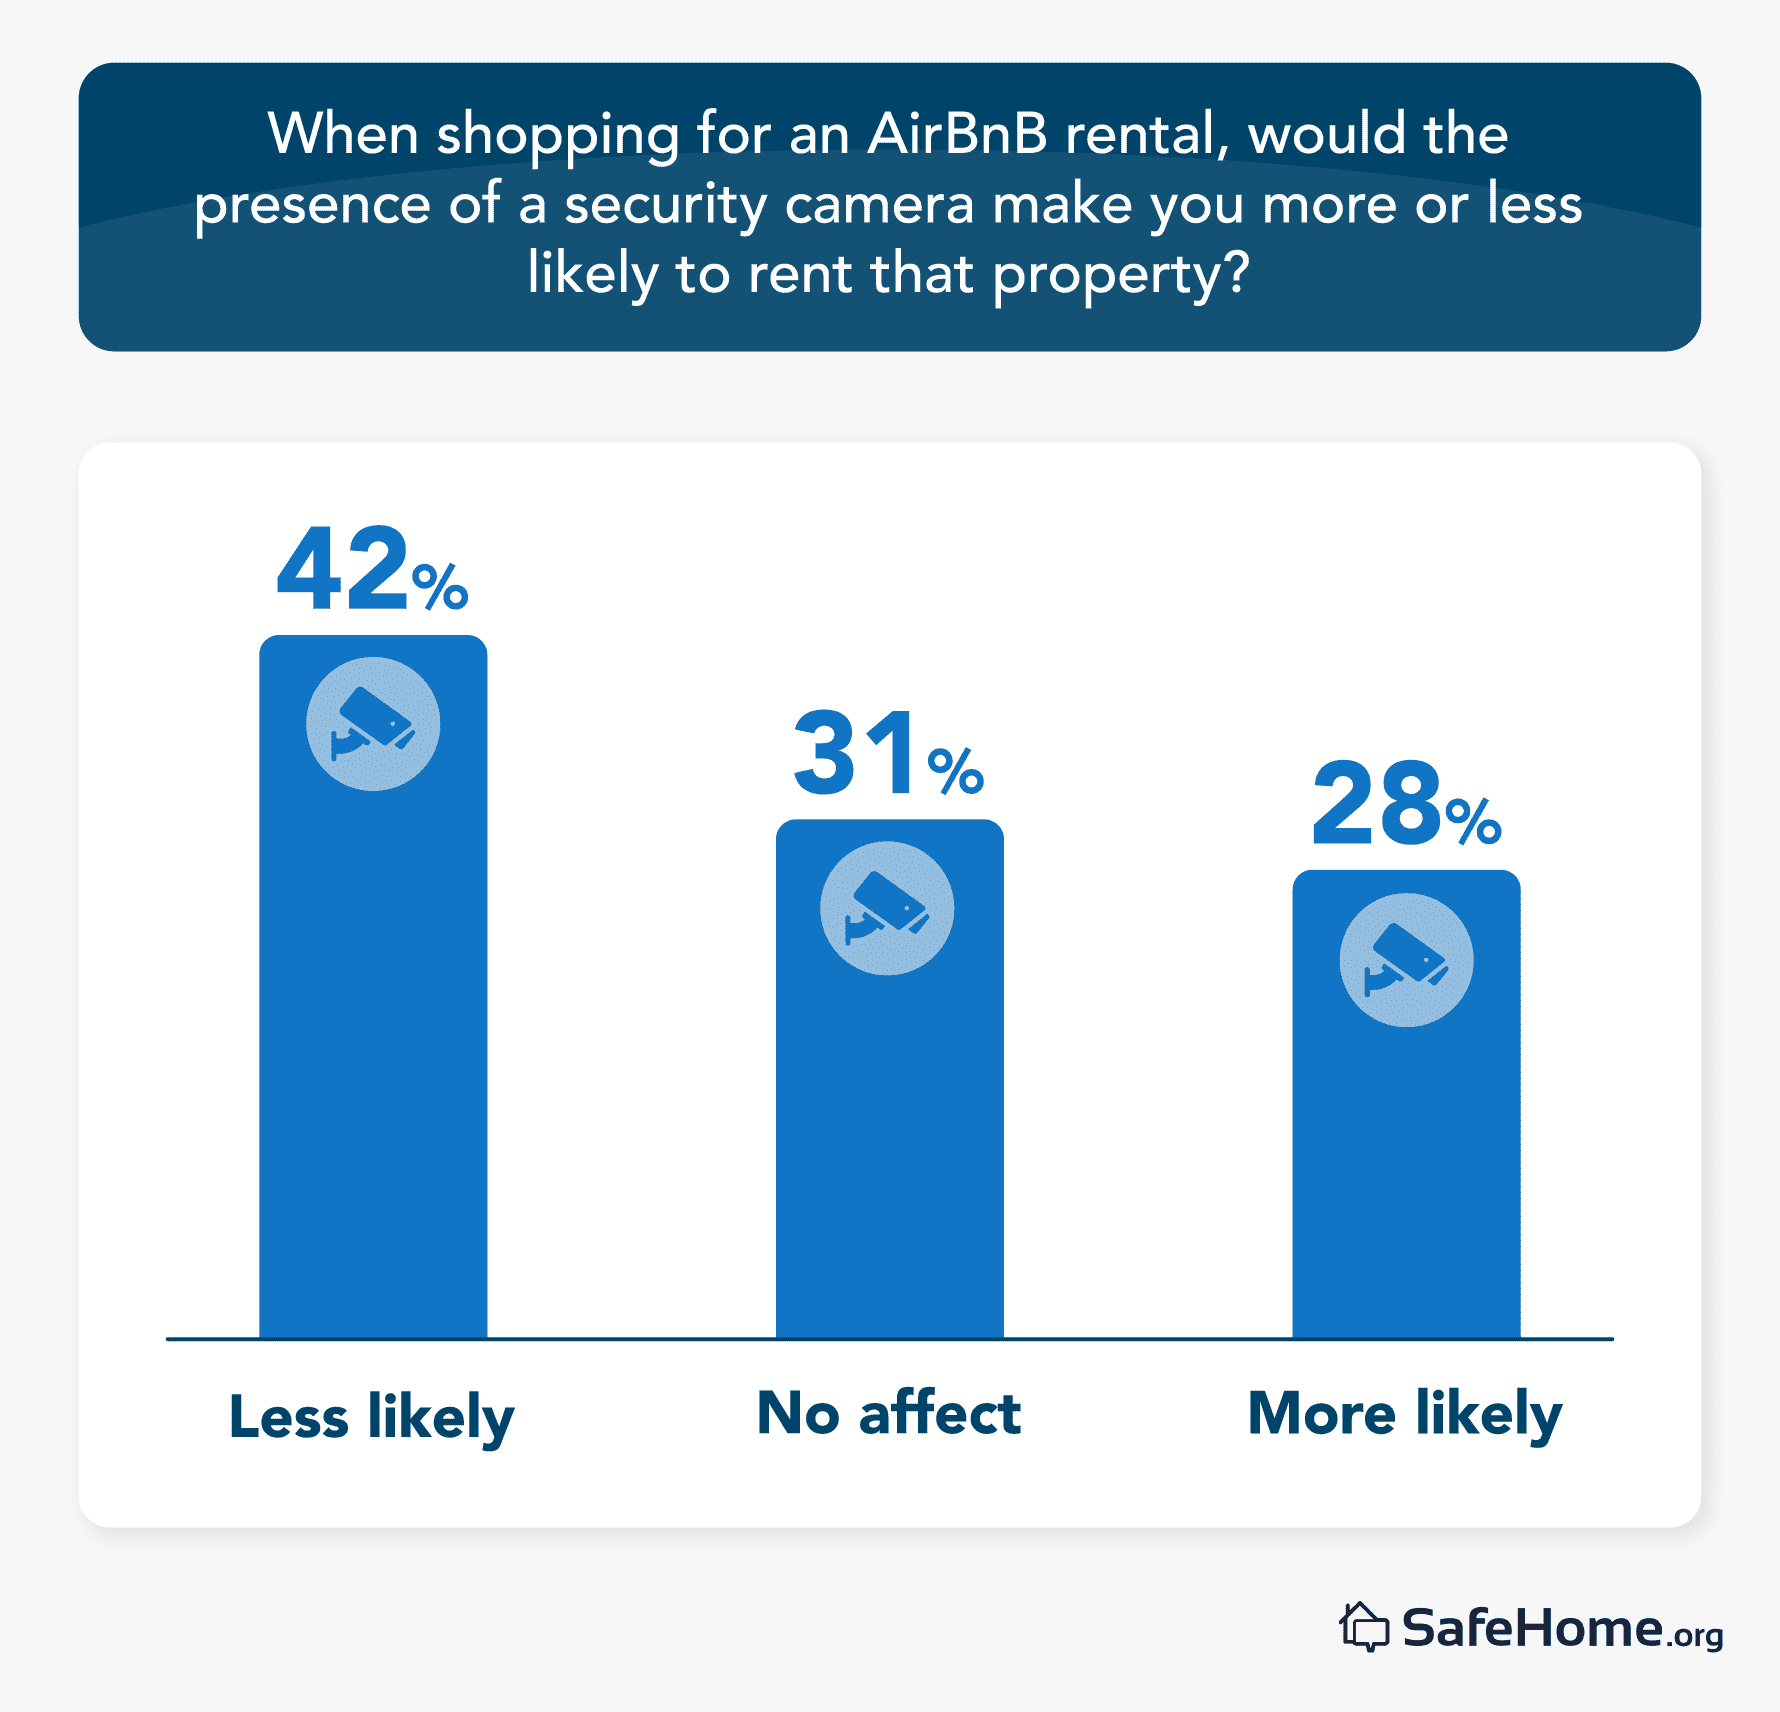 When shopping for an AirBnB rental, would the presense of a security camera make you more or less likely to rent that property?